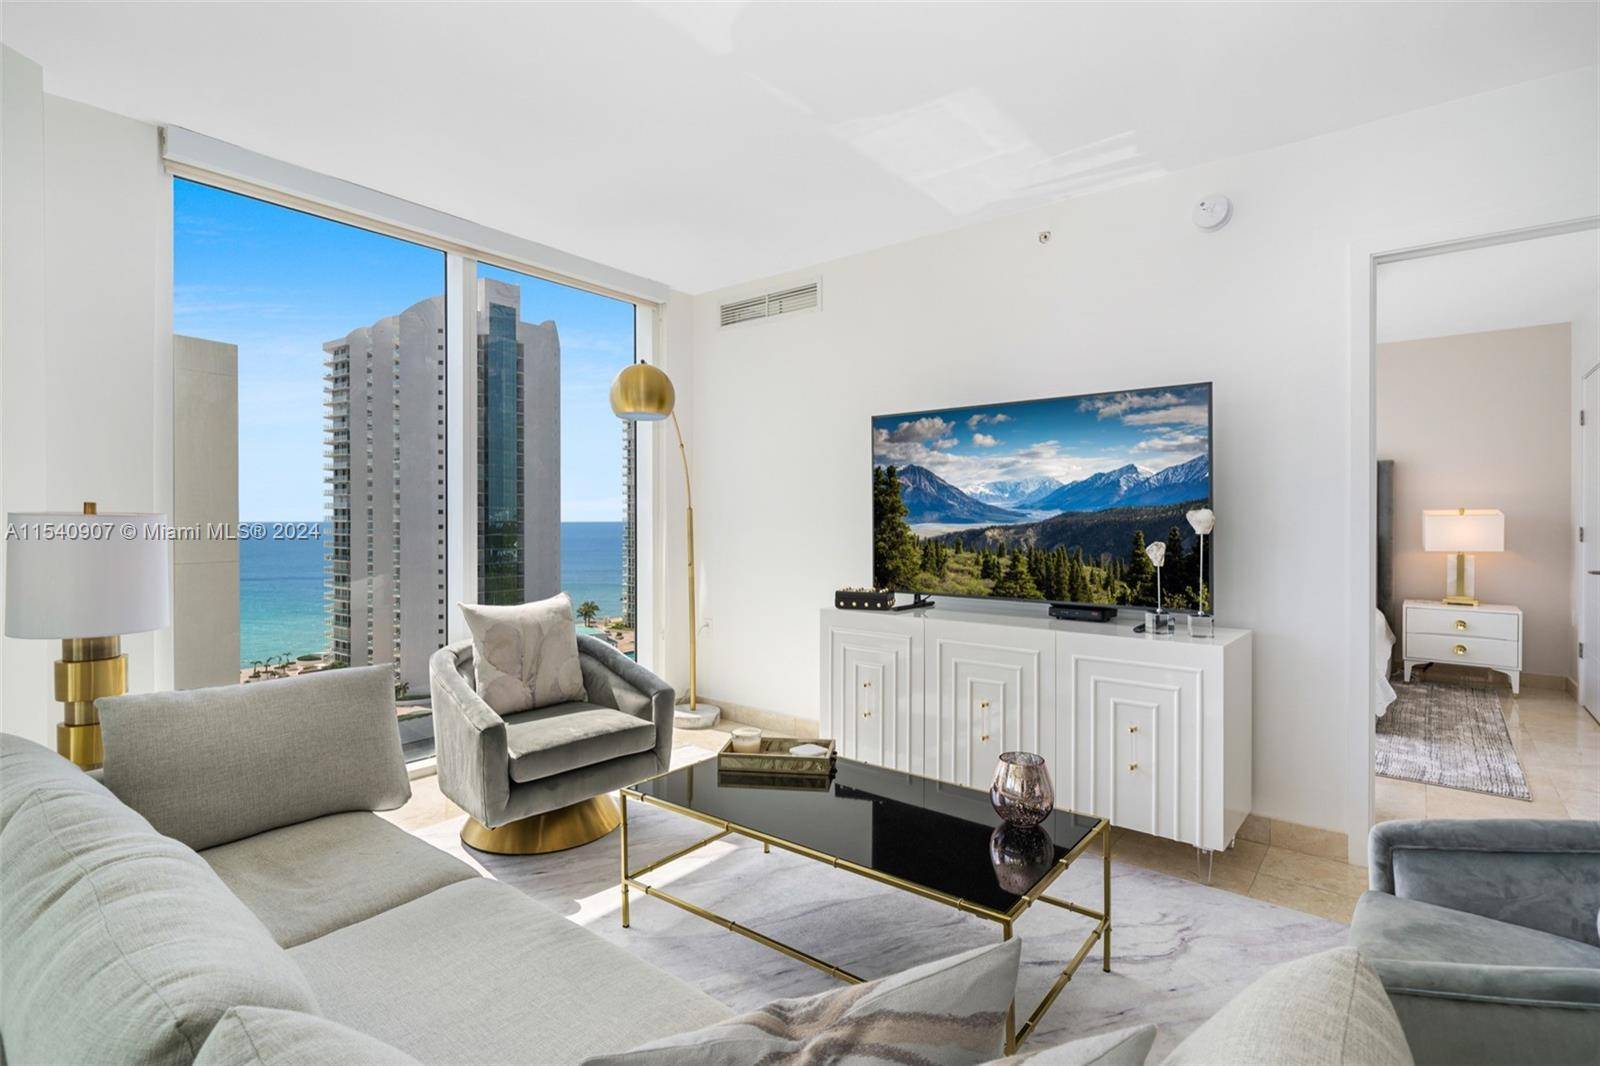 This exquisite 3 bedroom, 2 bathroom condo offers the ultimate beachside living experience.